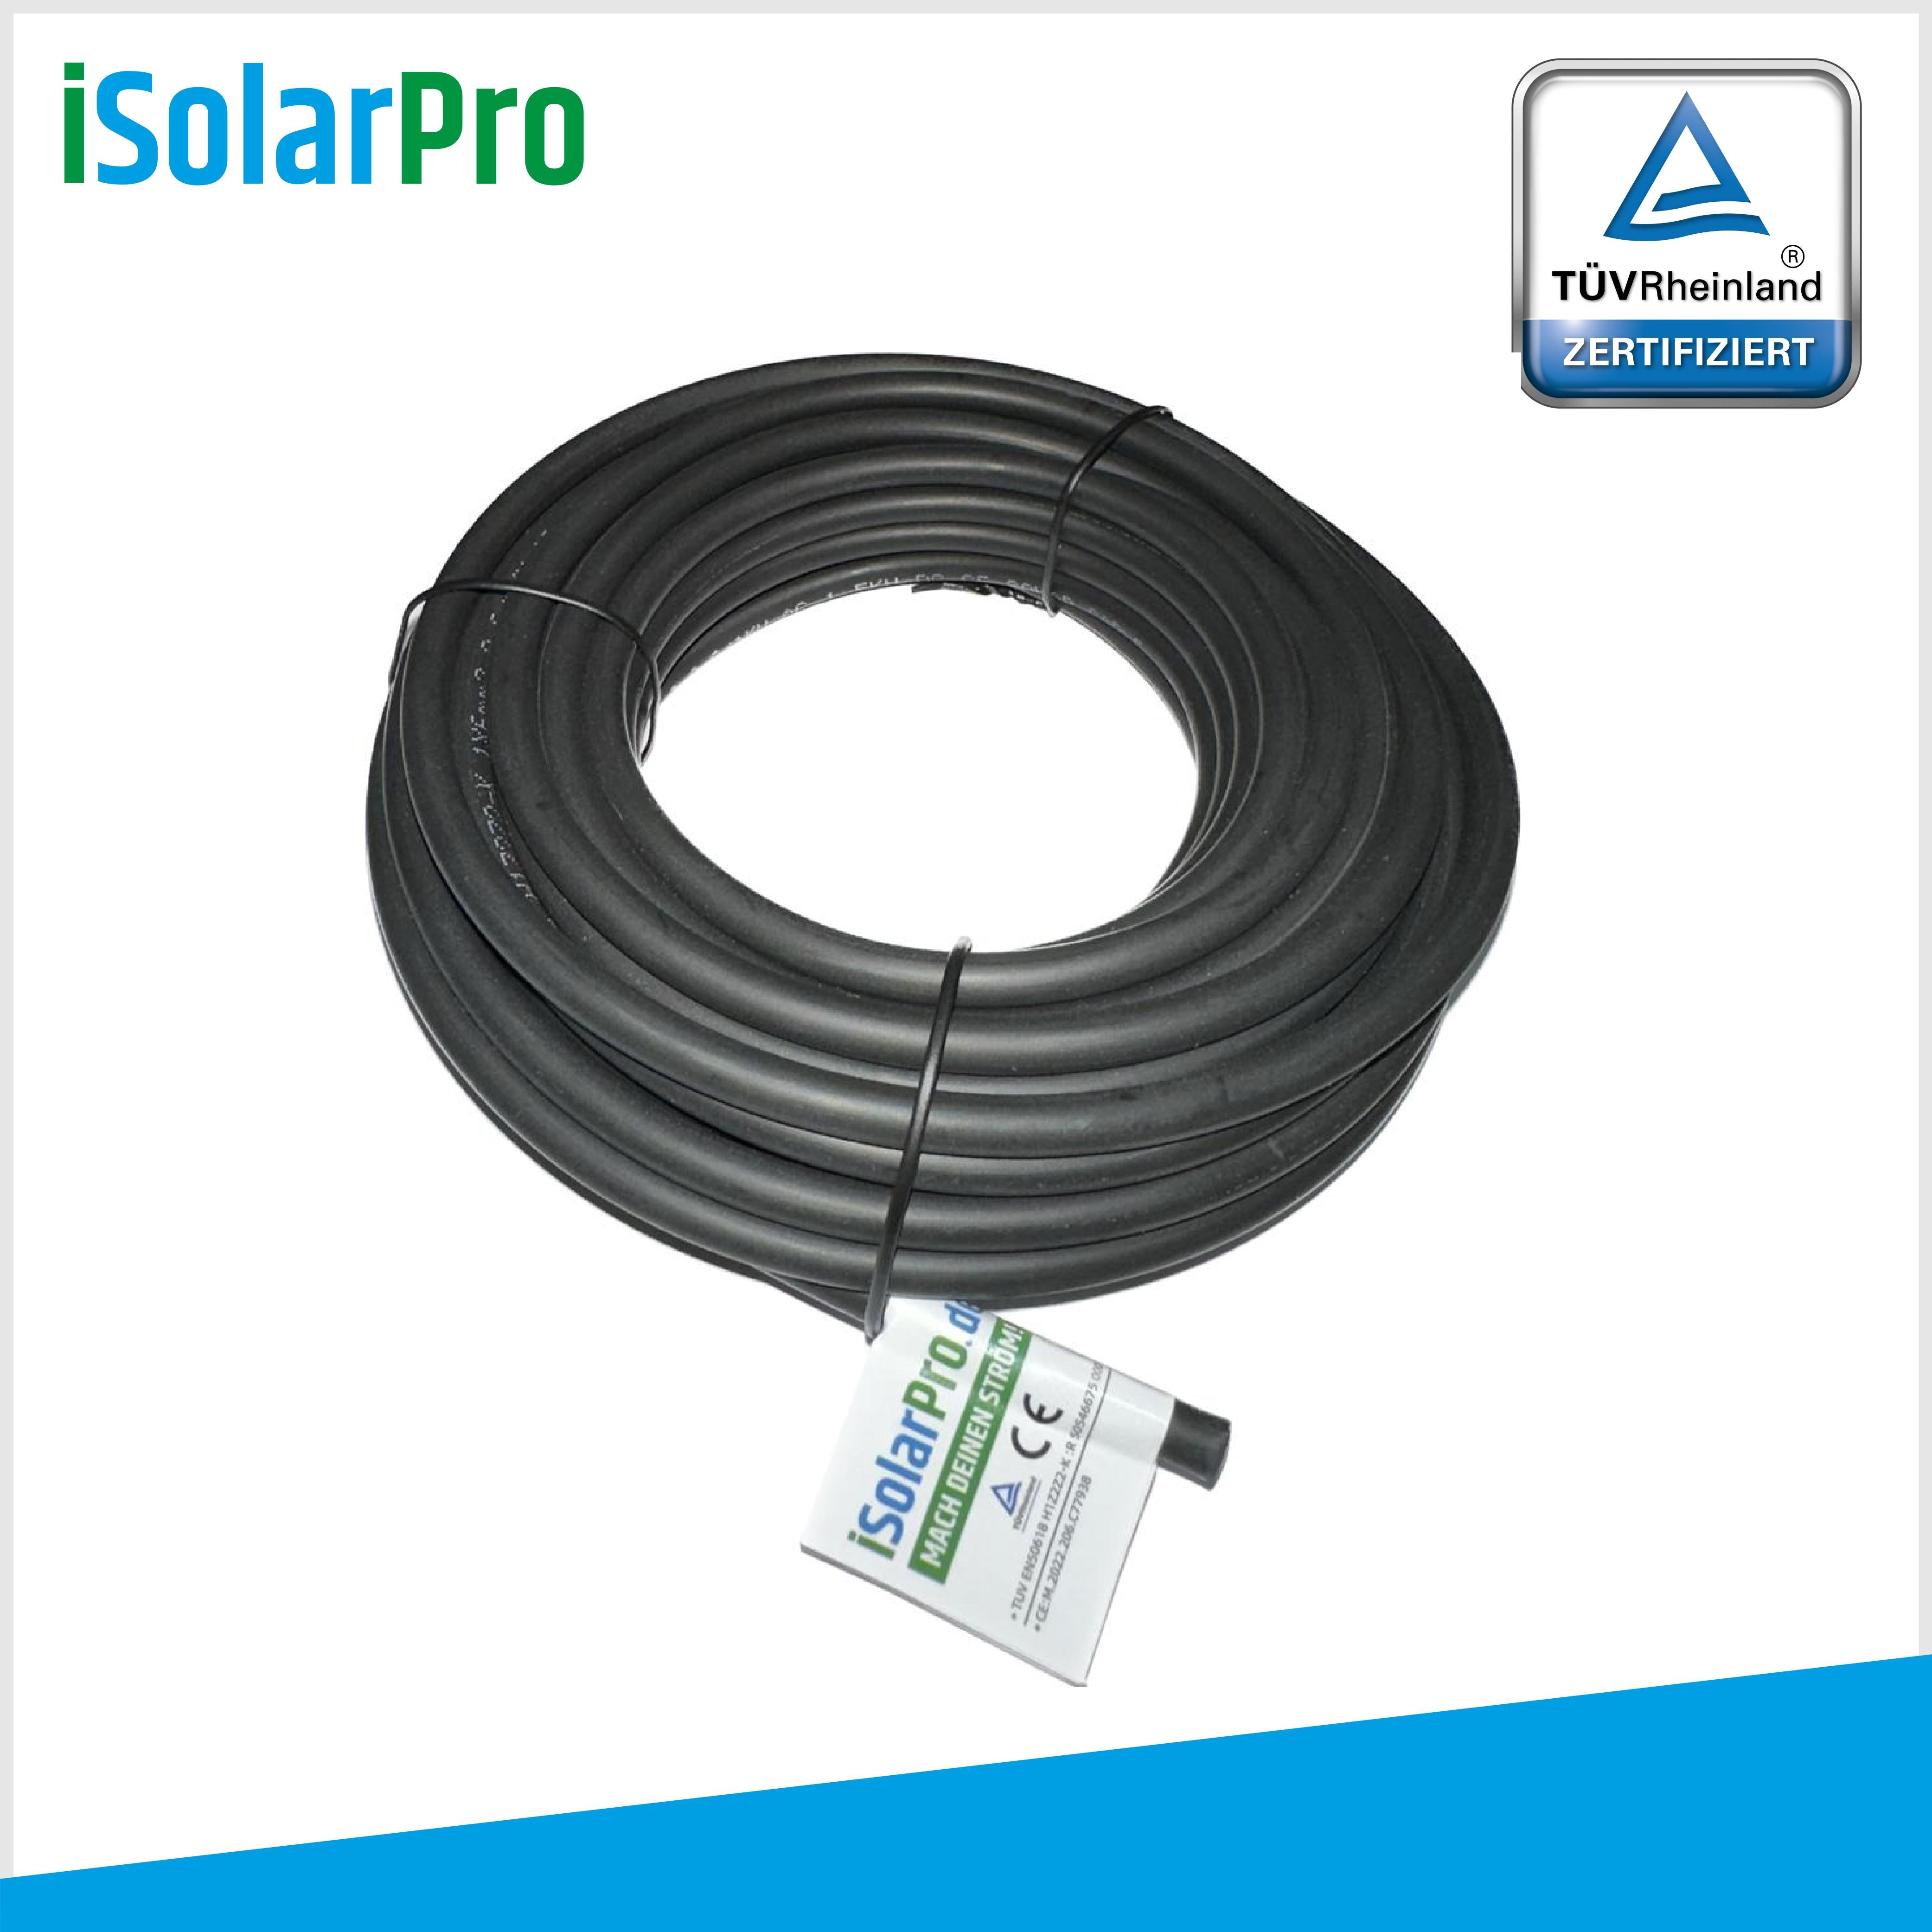 10m solar cable 4 mm² photovoltaic cable for PV systems black